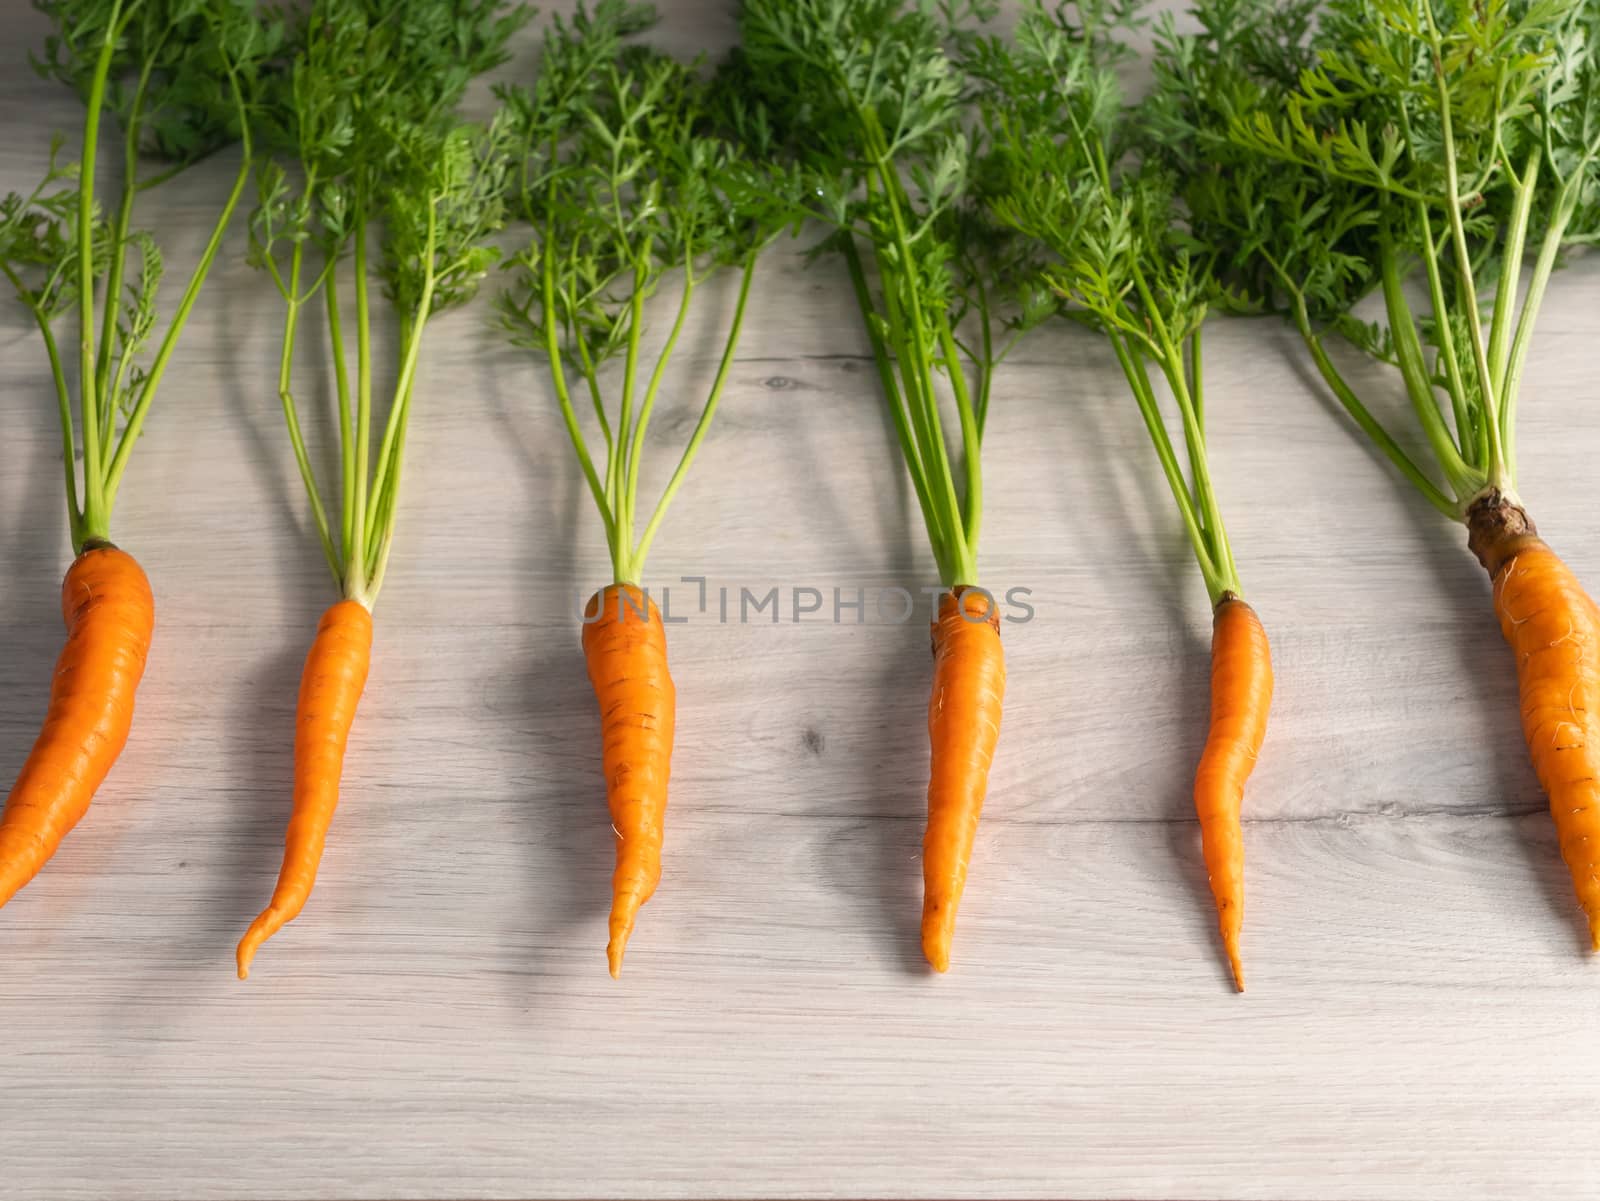 Fresh carrots only from the garden. Orange carrots with a green stem on a light background. Appetizing healthy vegetable.